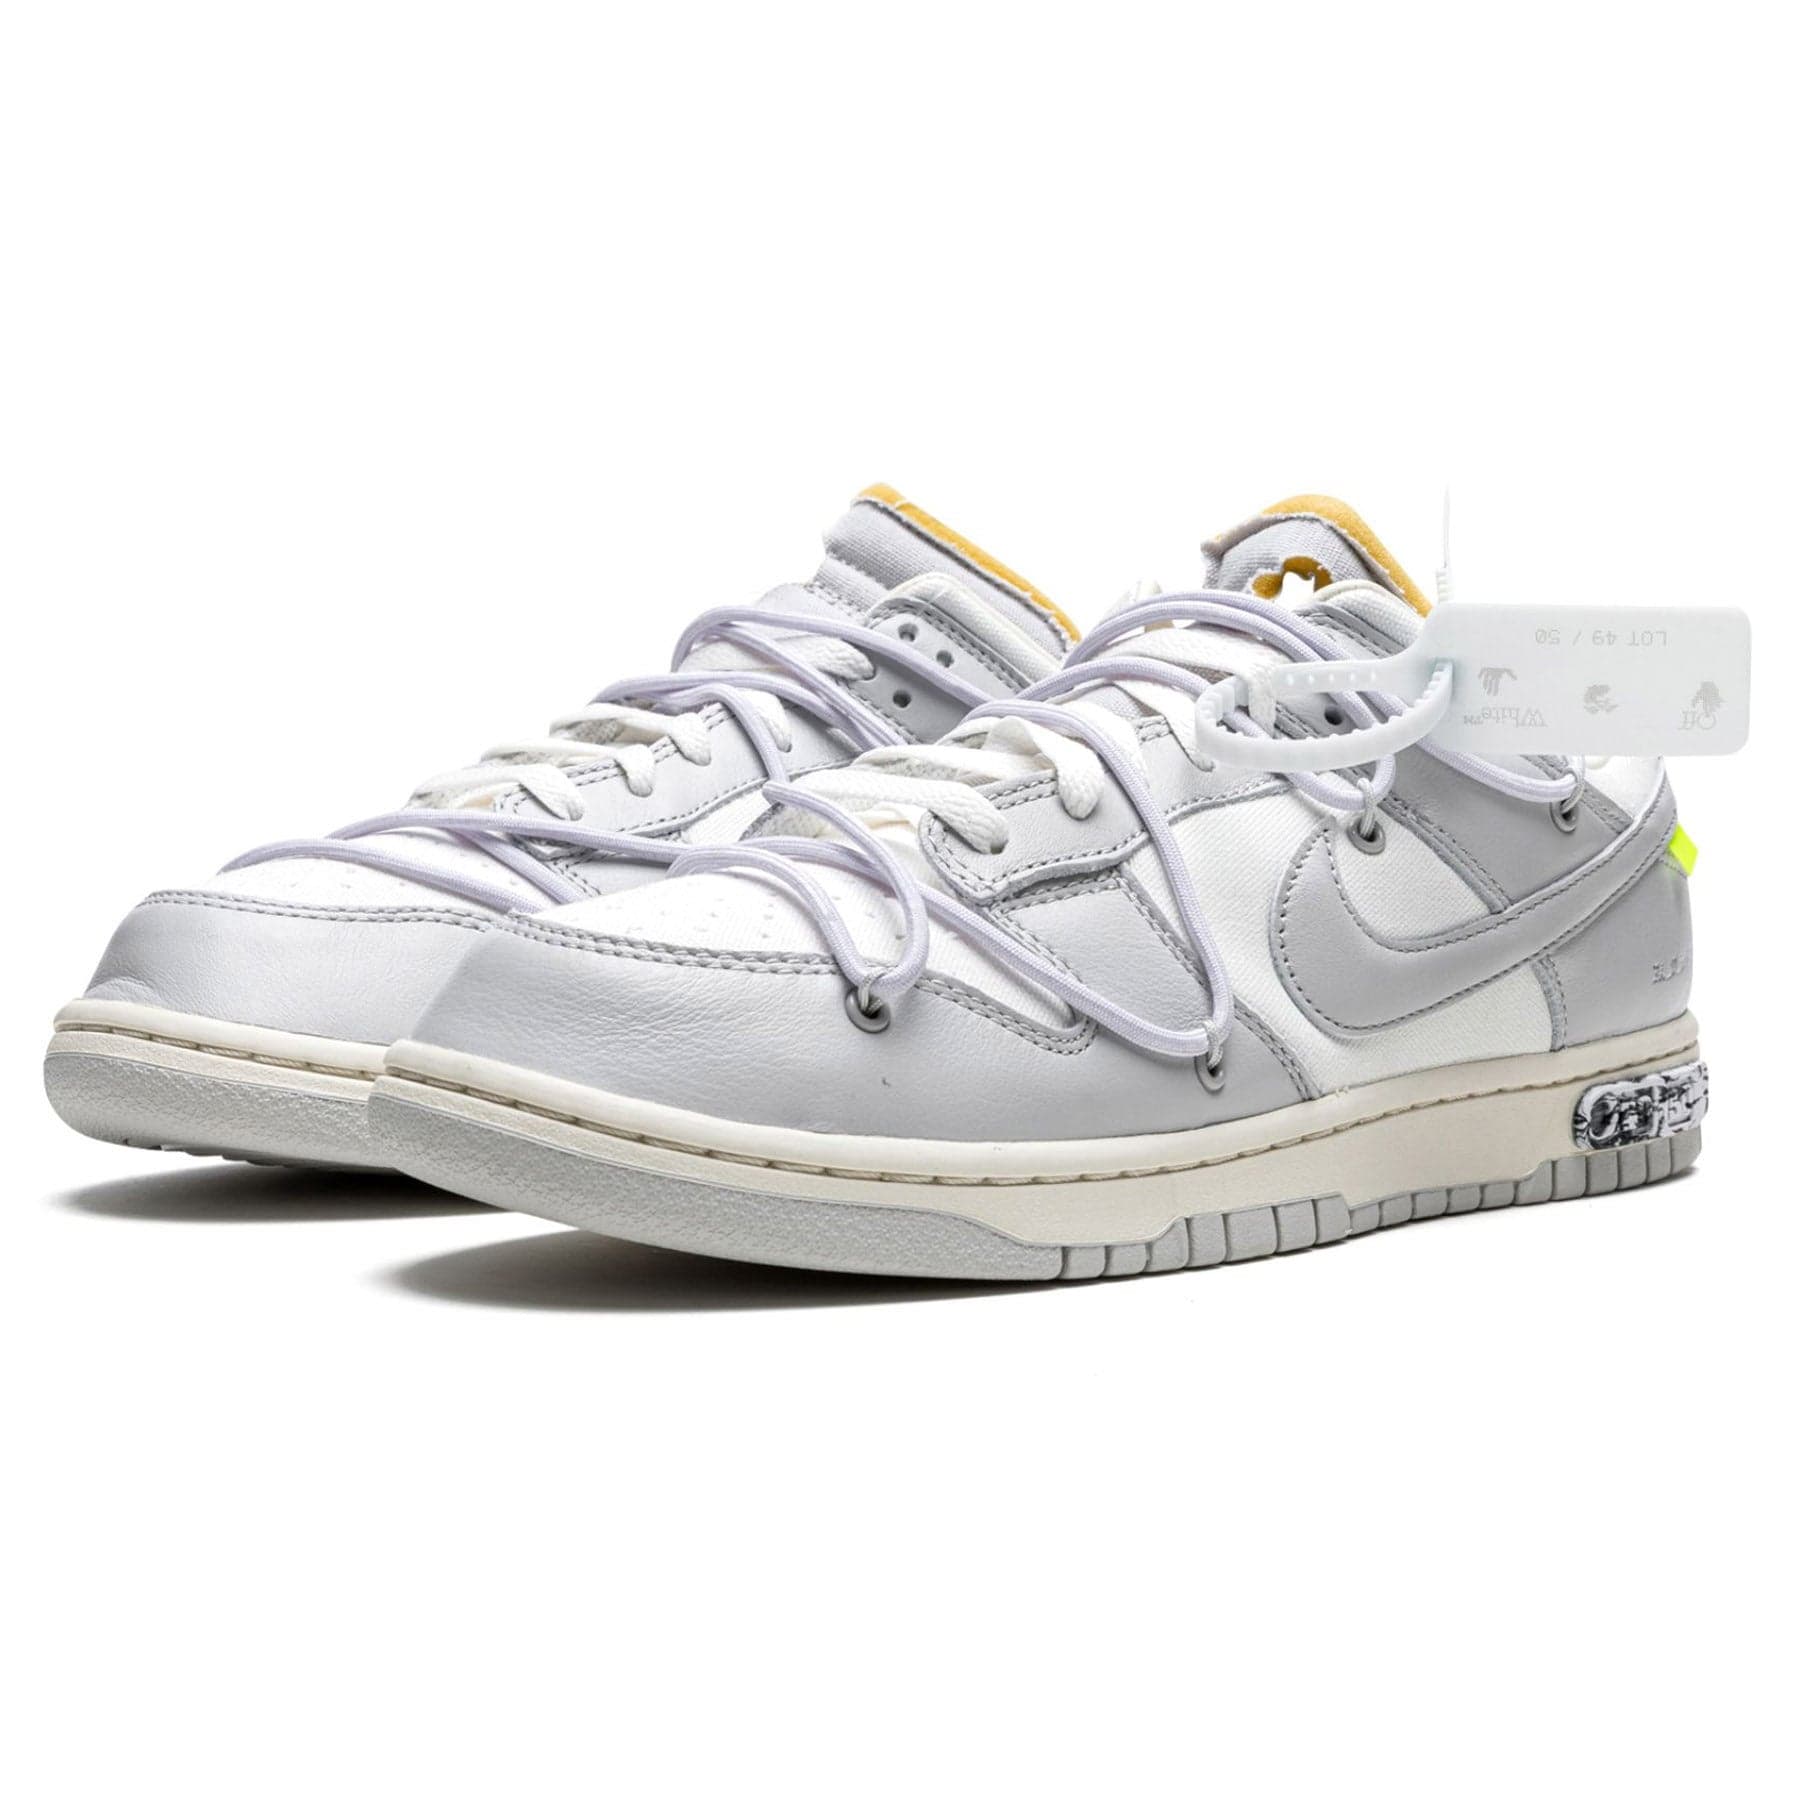 OFF-WHITE × NIKE DUNK LOW  1 OF 50 “49”